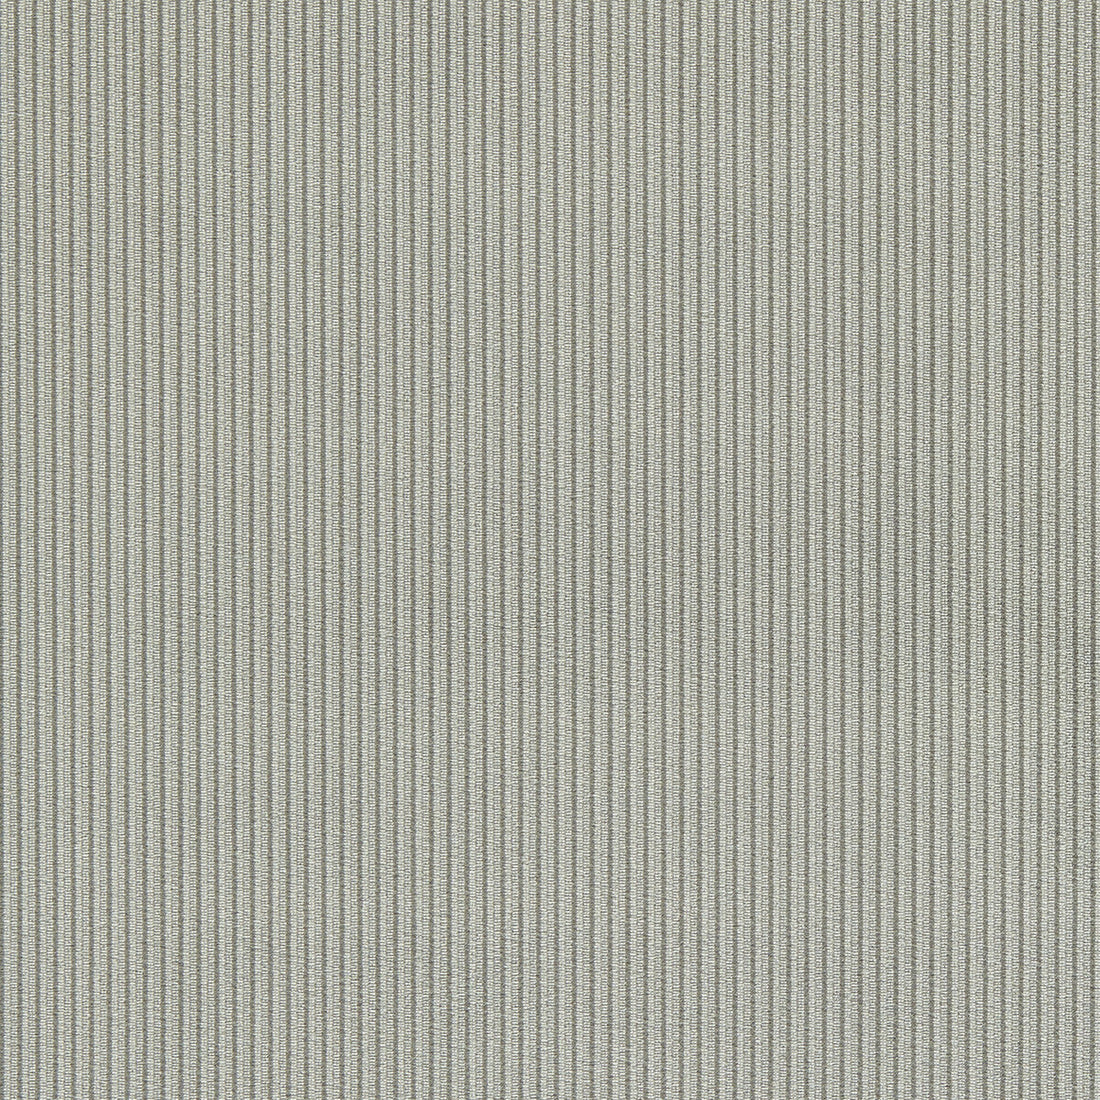 Ashdown fabric in graphite color - pattern F1688/04.CAC.0 - by Clarke And Clarke in the Whitworth collection